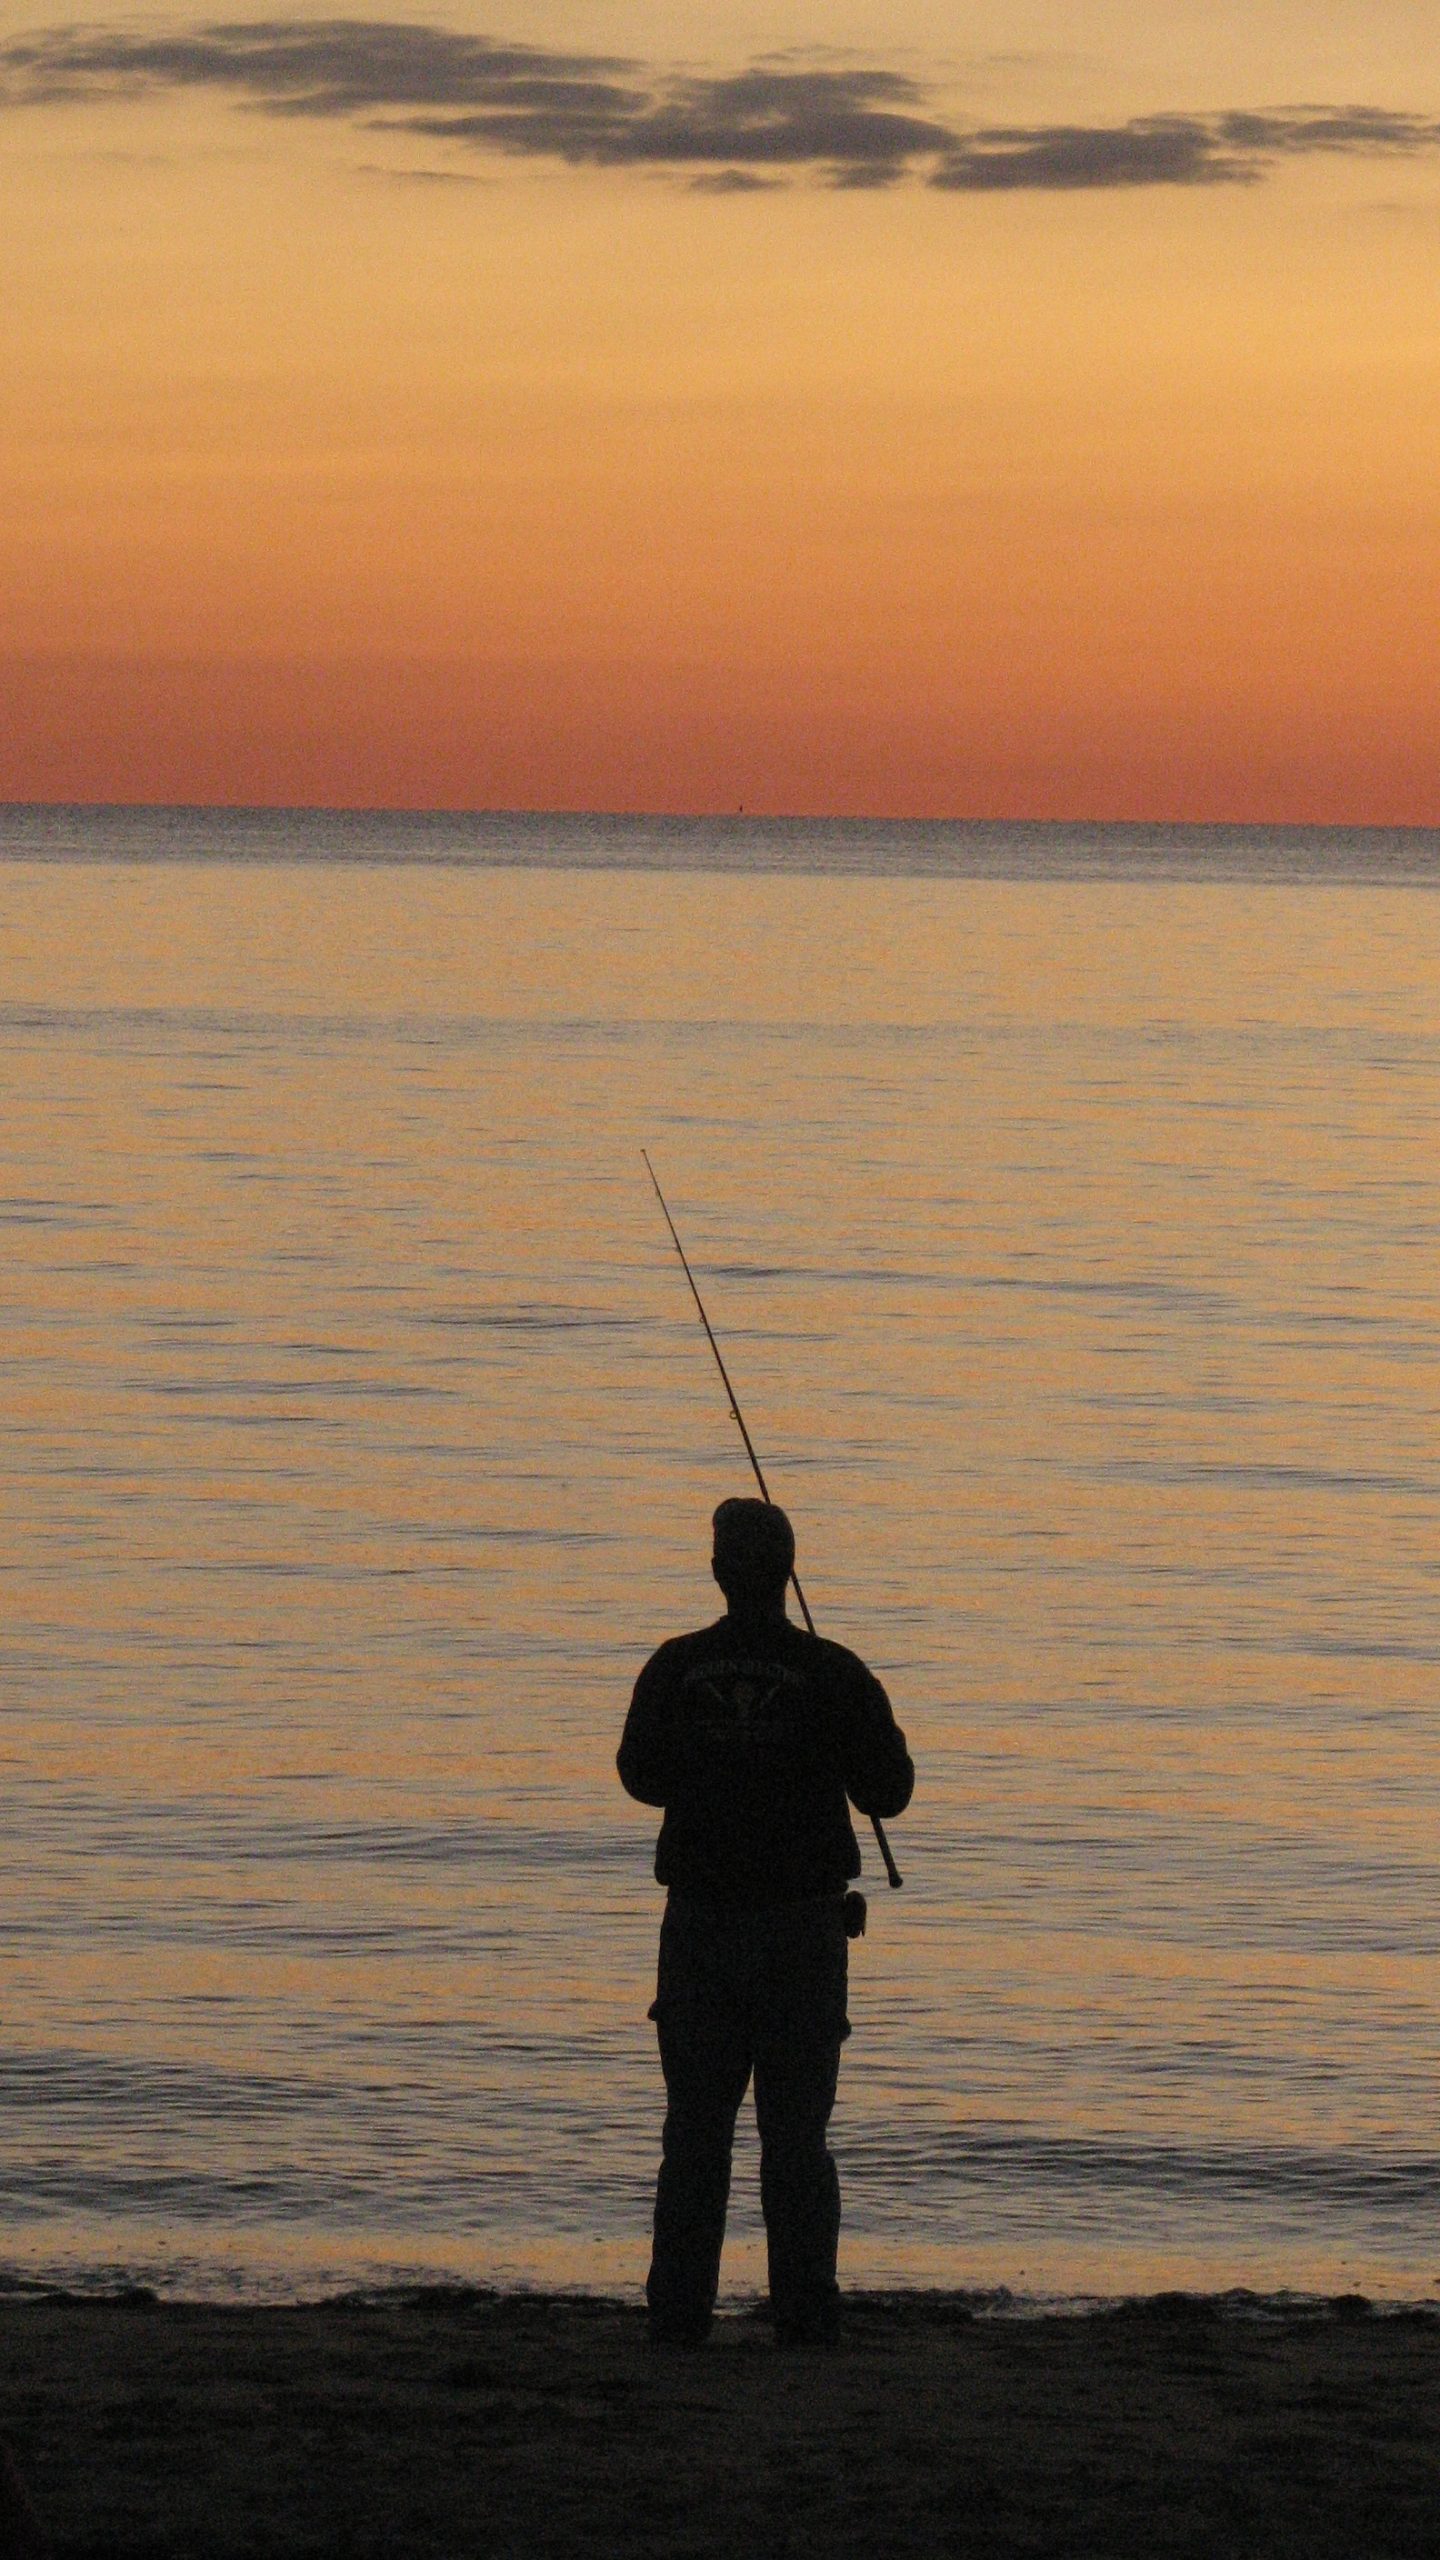 Sunken Meadow Fishing (user submitted)